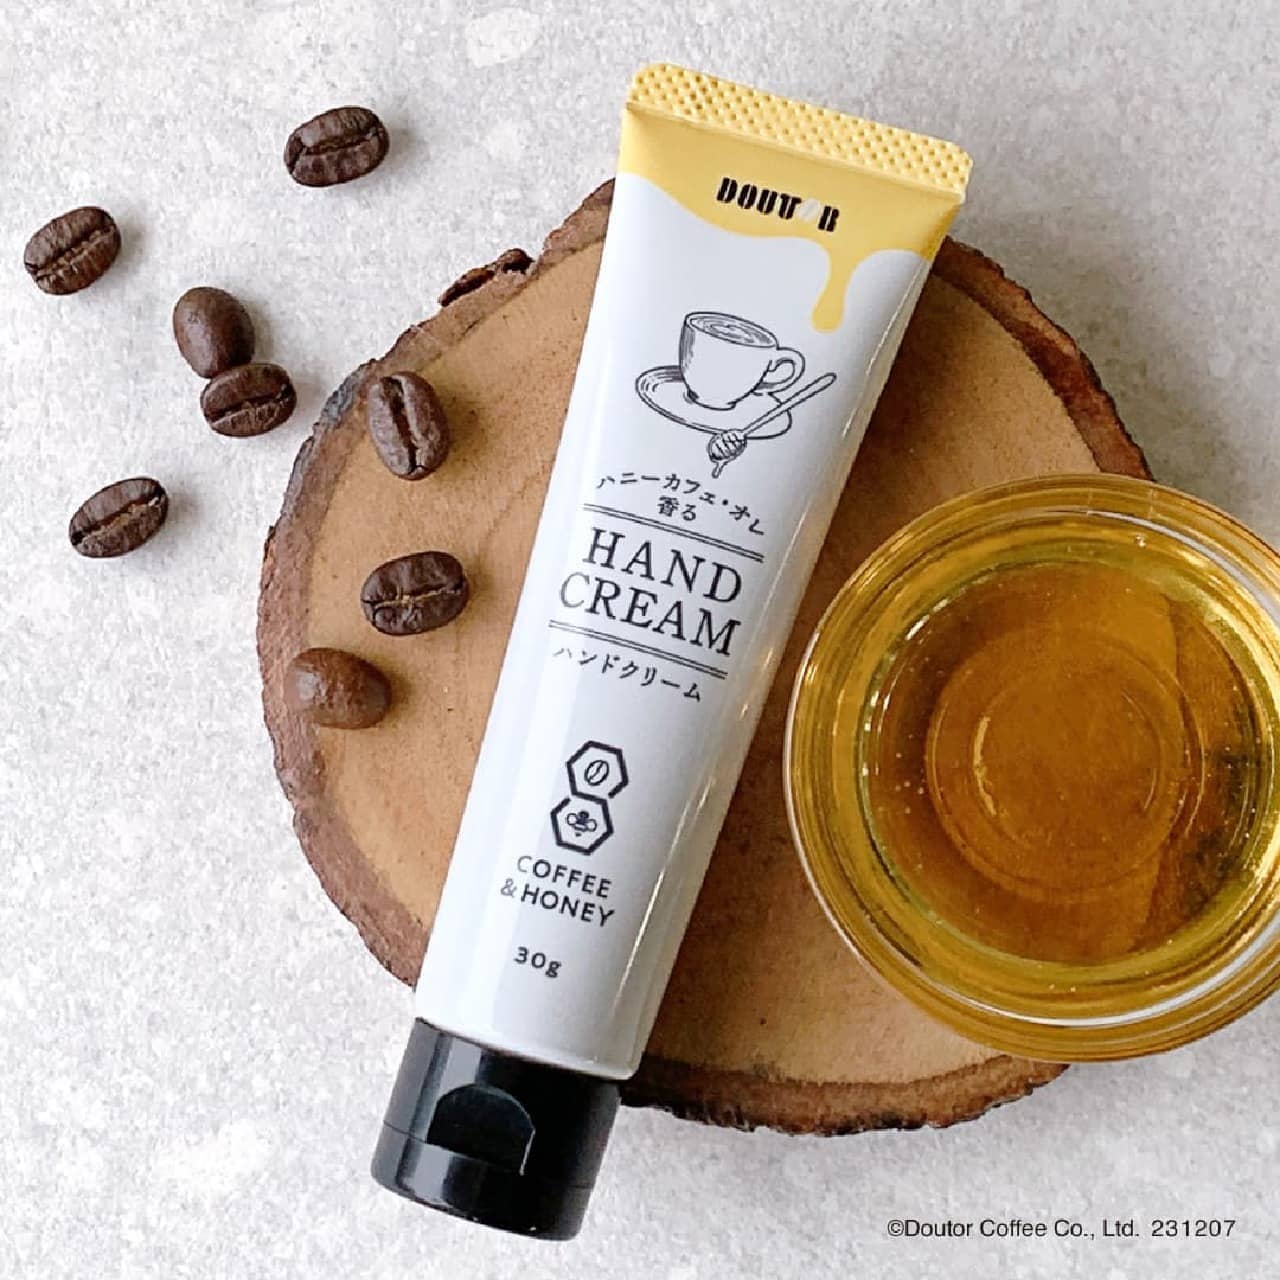 Doutor mail order limited “Honey Cafe Ole Fragrant Hand Cream”